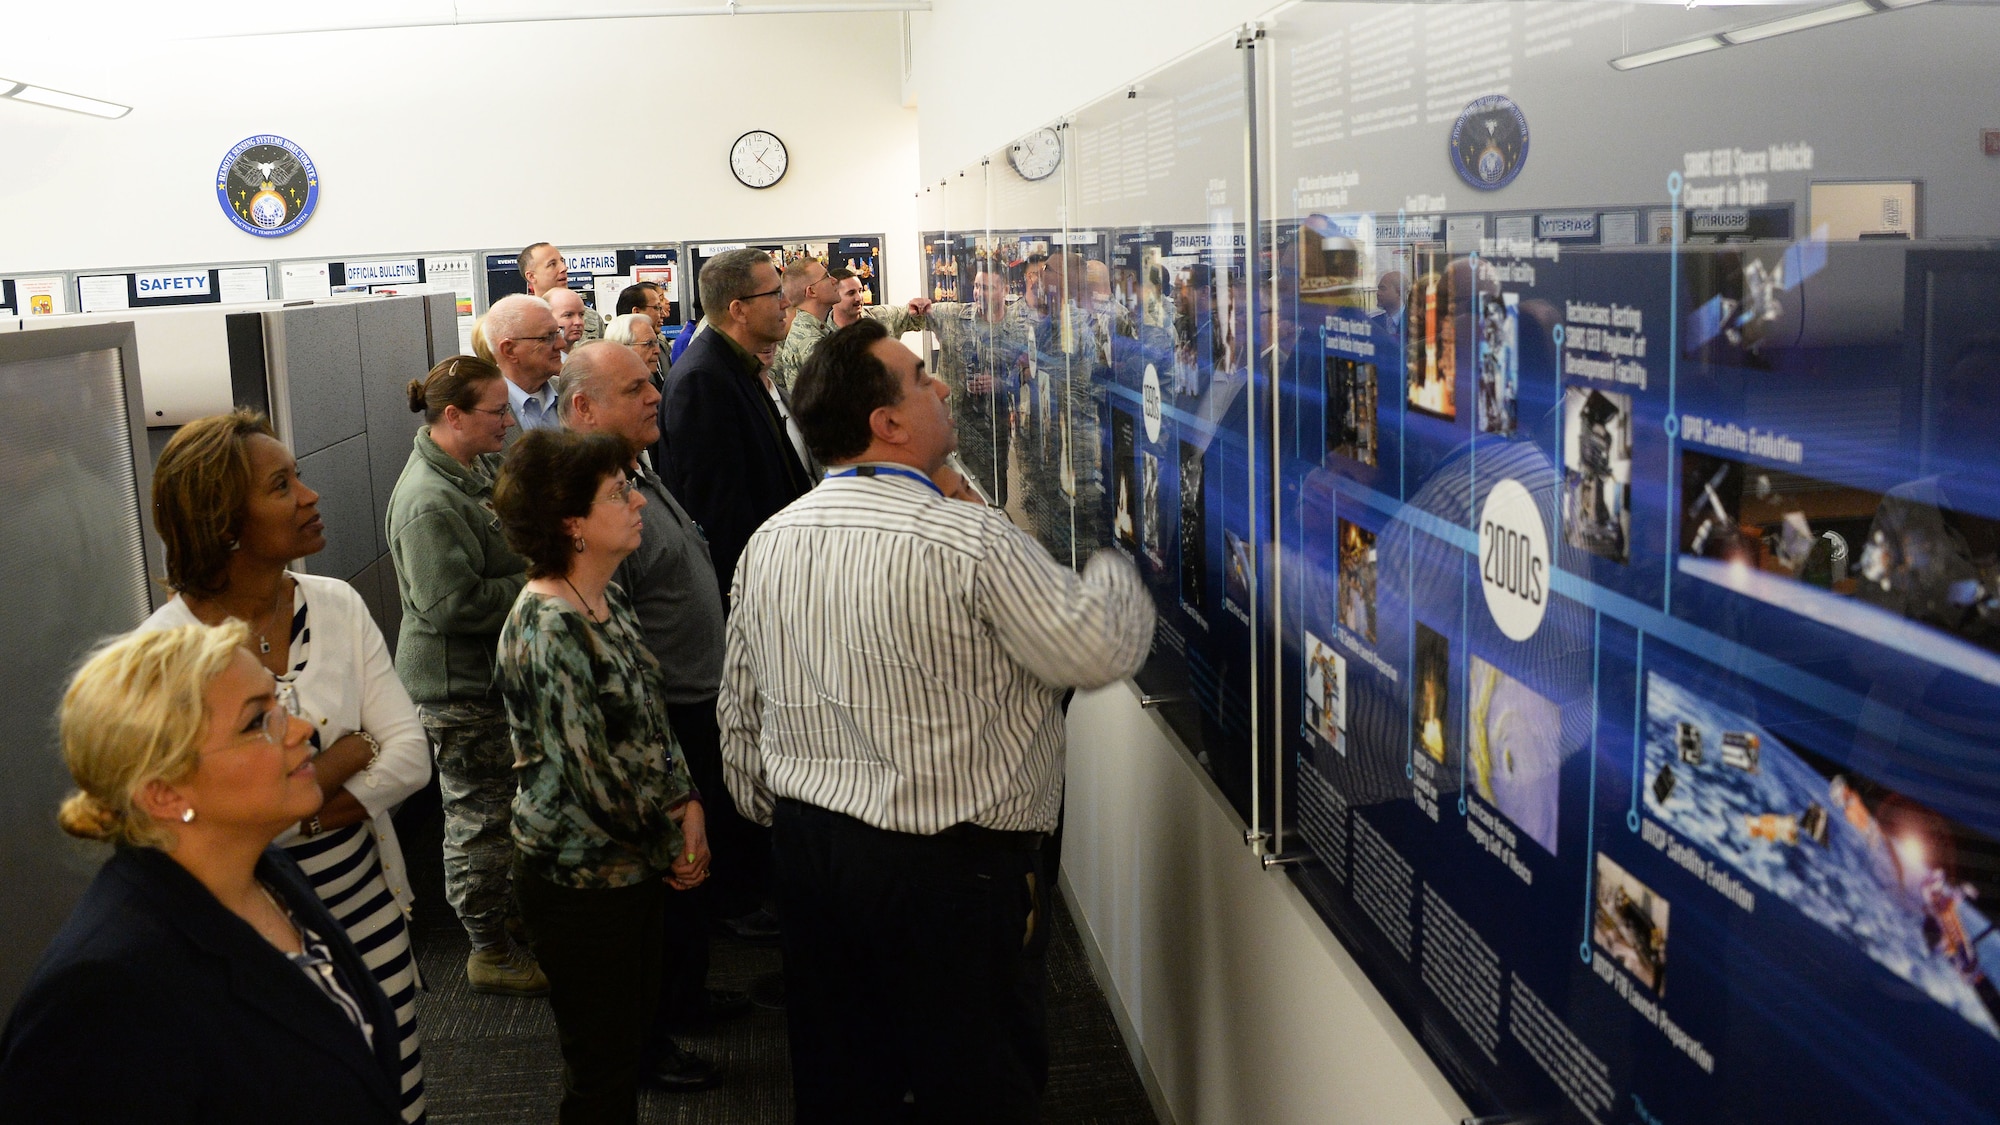 Staff and personnel from the Space and Missile Systems Center’s Remote Sensing Systems Directorate look over the newly unveiled Remote Sensing Heritage Wall at Los Angeles Air Force Base in El Segundo, Calif., March 15, 2017.  The unveiling ceremony commemorates an SMC mission that spans nearly six decades of providing global, persistent, infrared surveillance and environmental monitoring capabilities to our warfighters and the nation. (U.S. Air Force photo / Van De Ha)